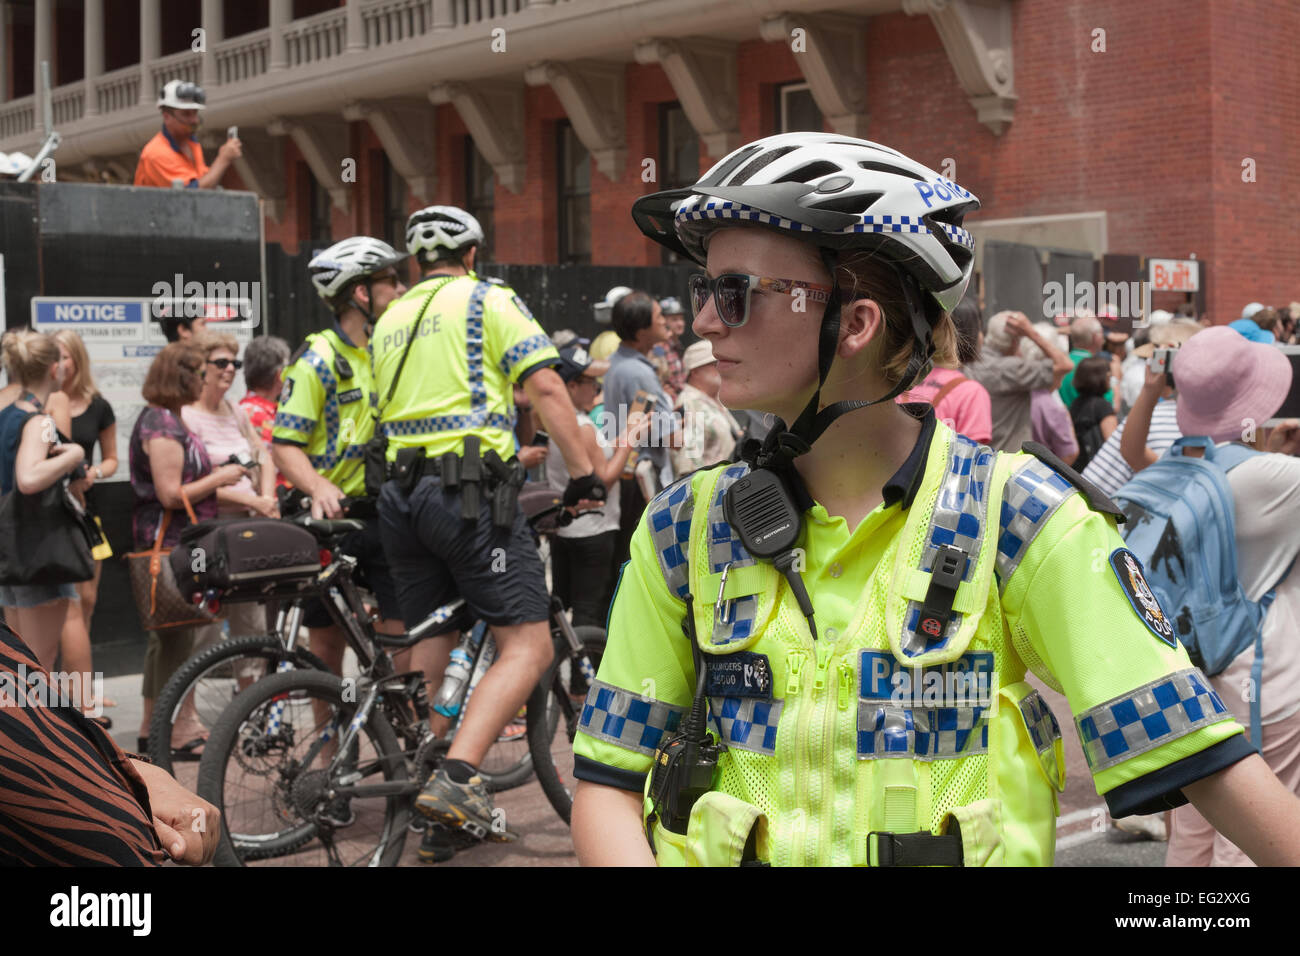 Female Western Australia police bicycle officer with two male colleagues in the background Stock Photo